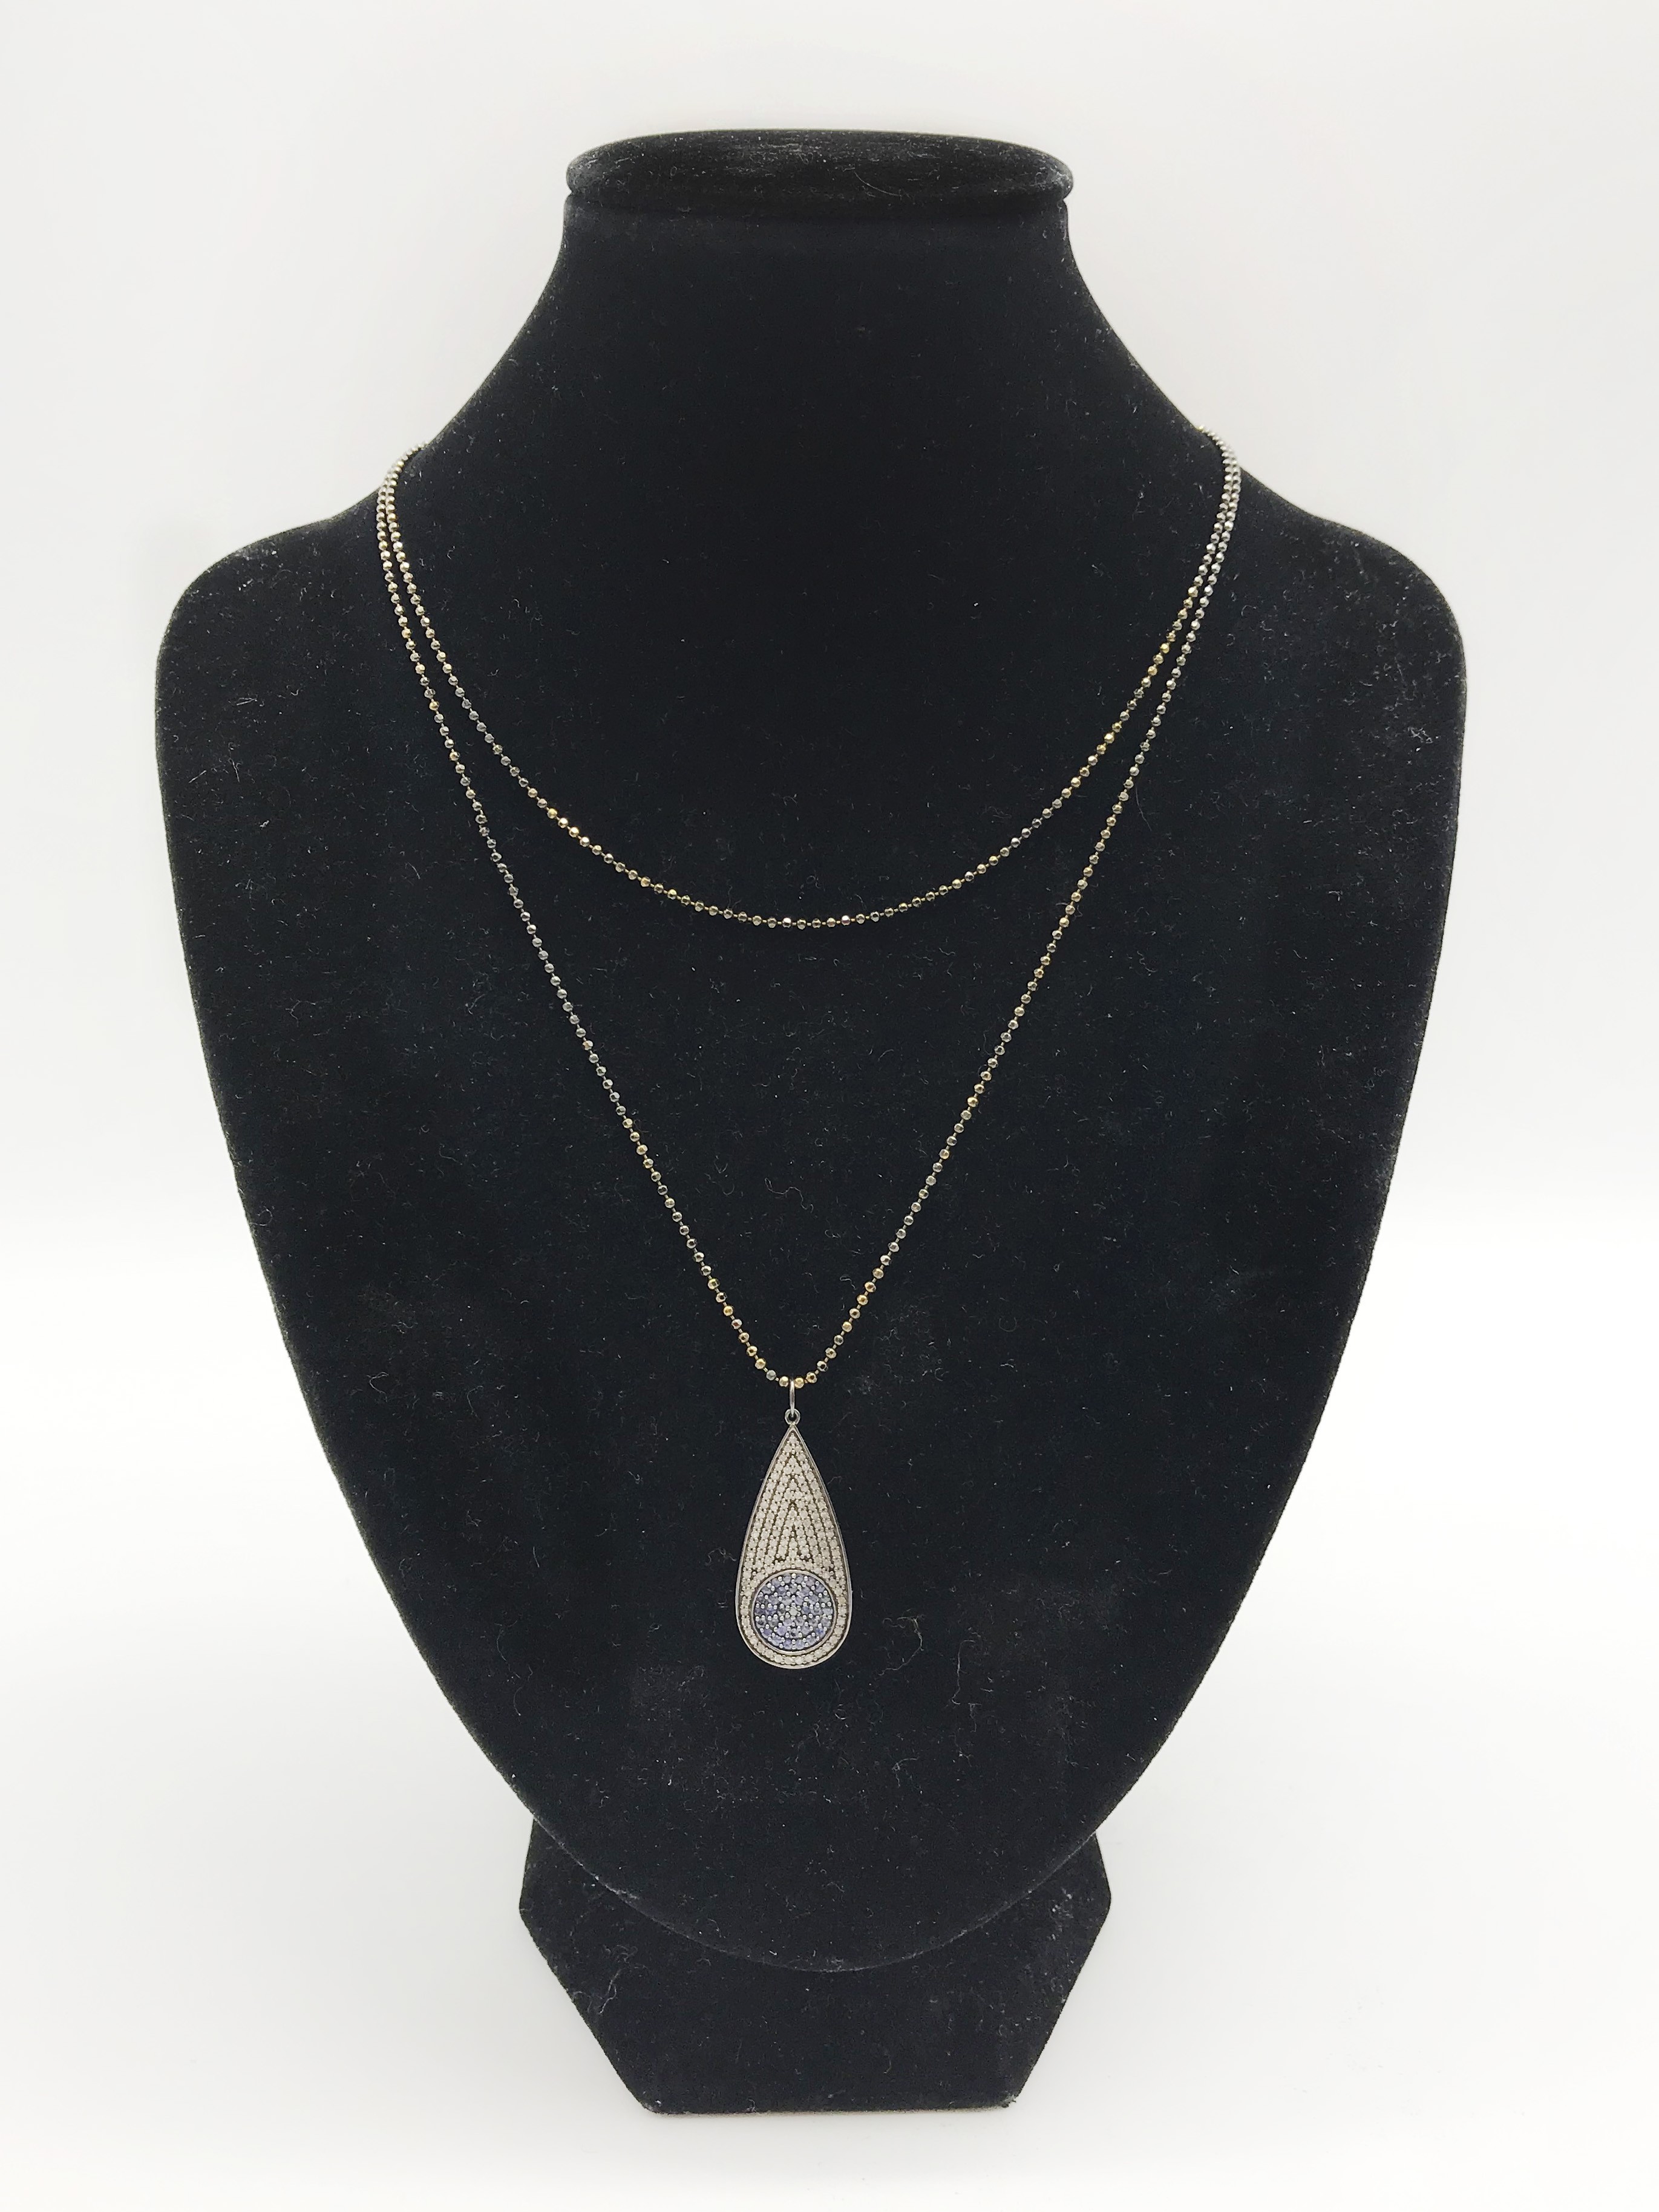 14 CARAT GOLD DIAMOND AND BLUE SAPPHIRE PENDANT AND CHAIN - Image 3 of 5